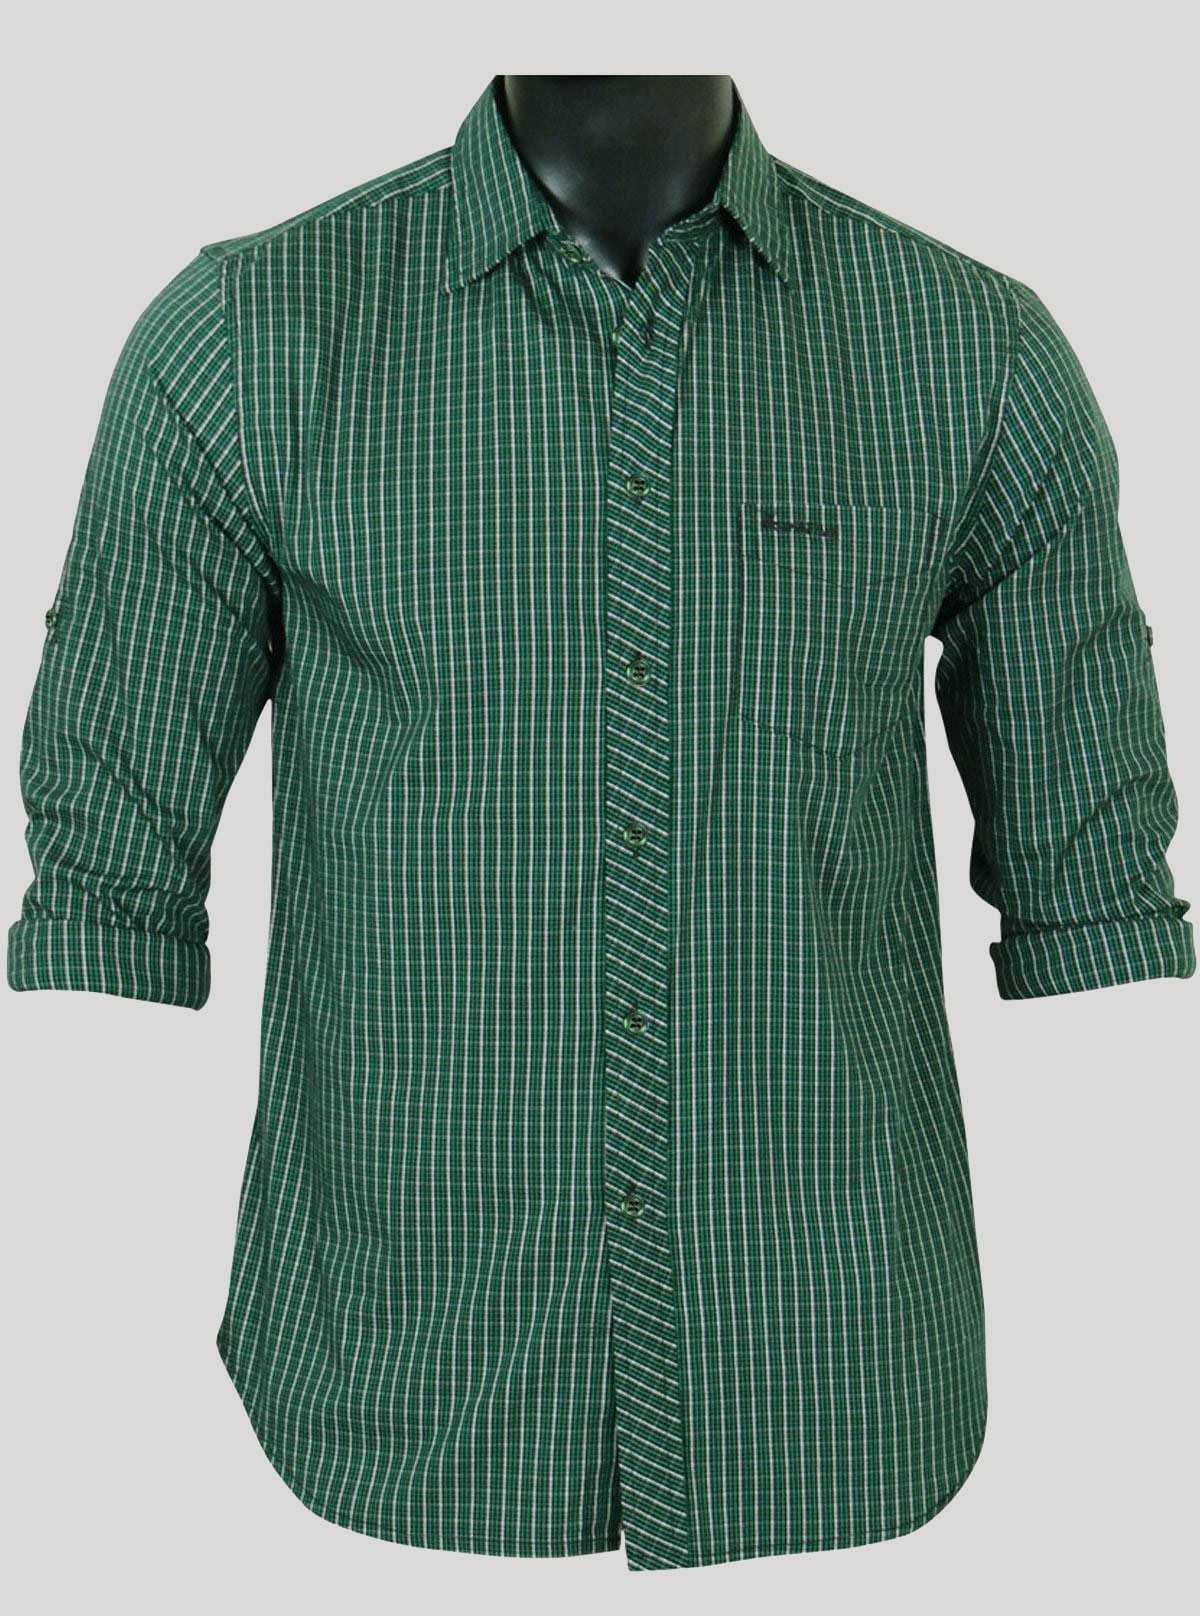 Slim fit - Micro Check Green Shirt Boer and Fitch - 1